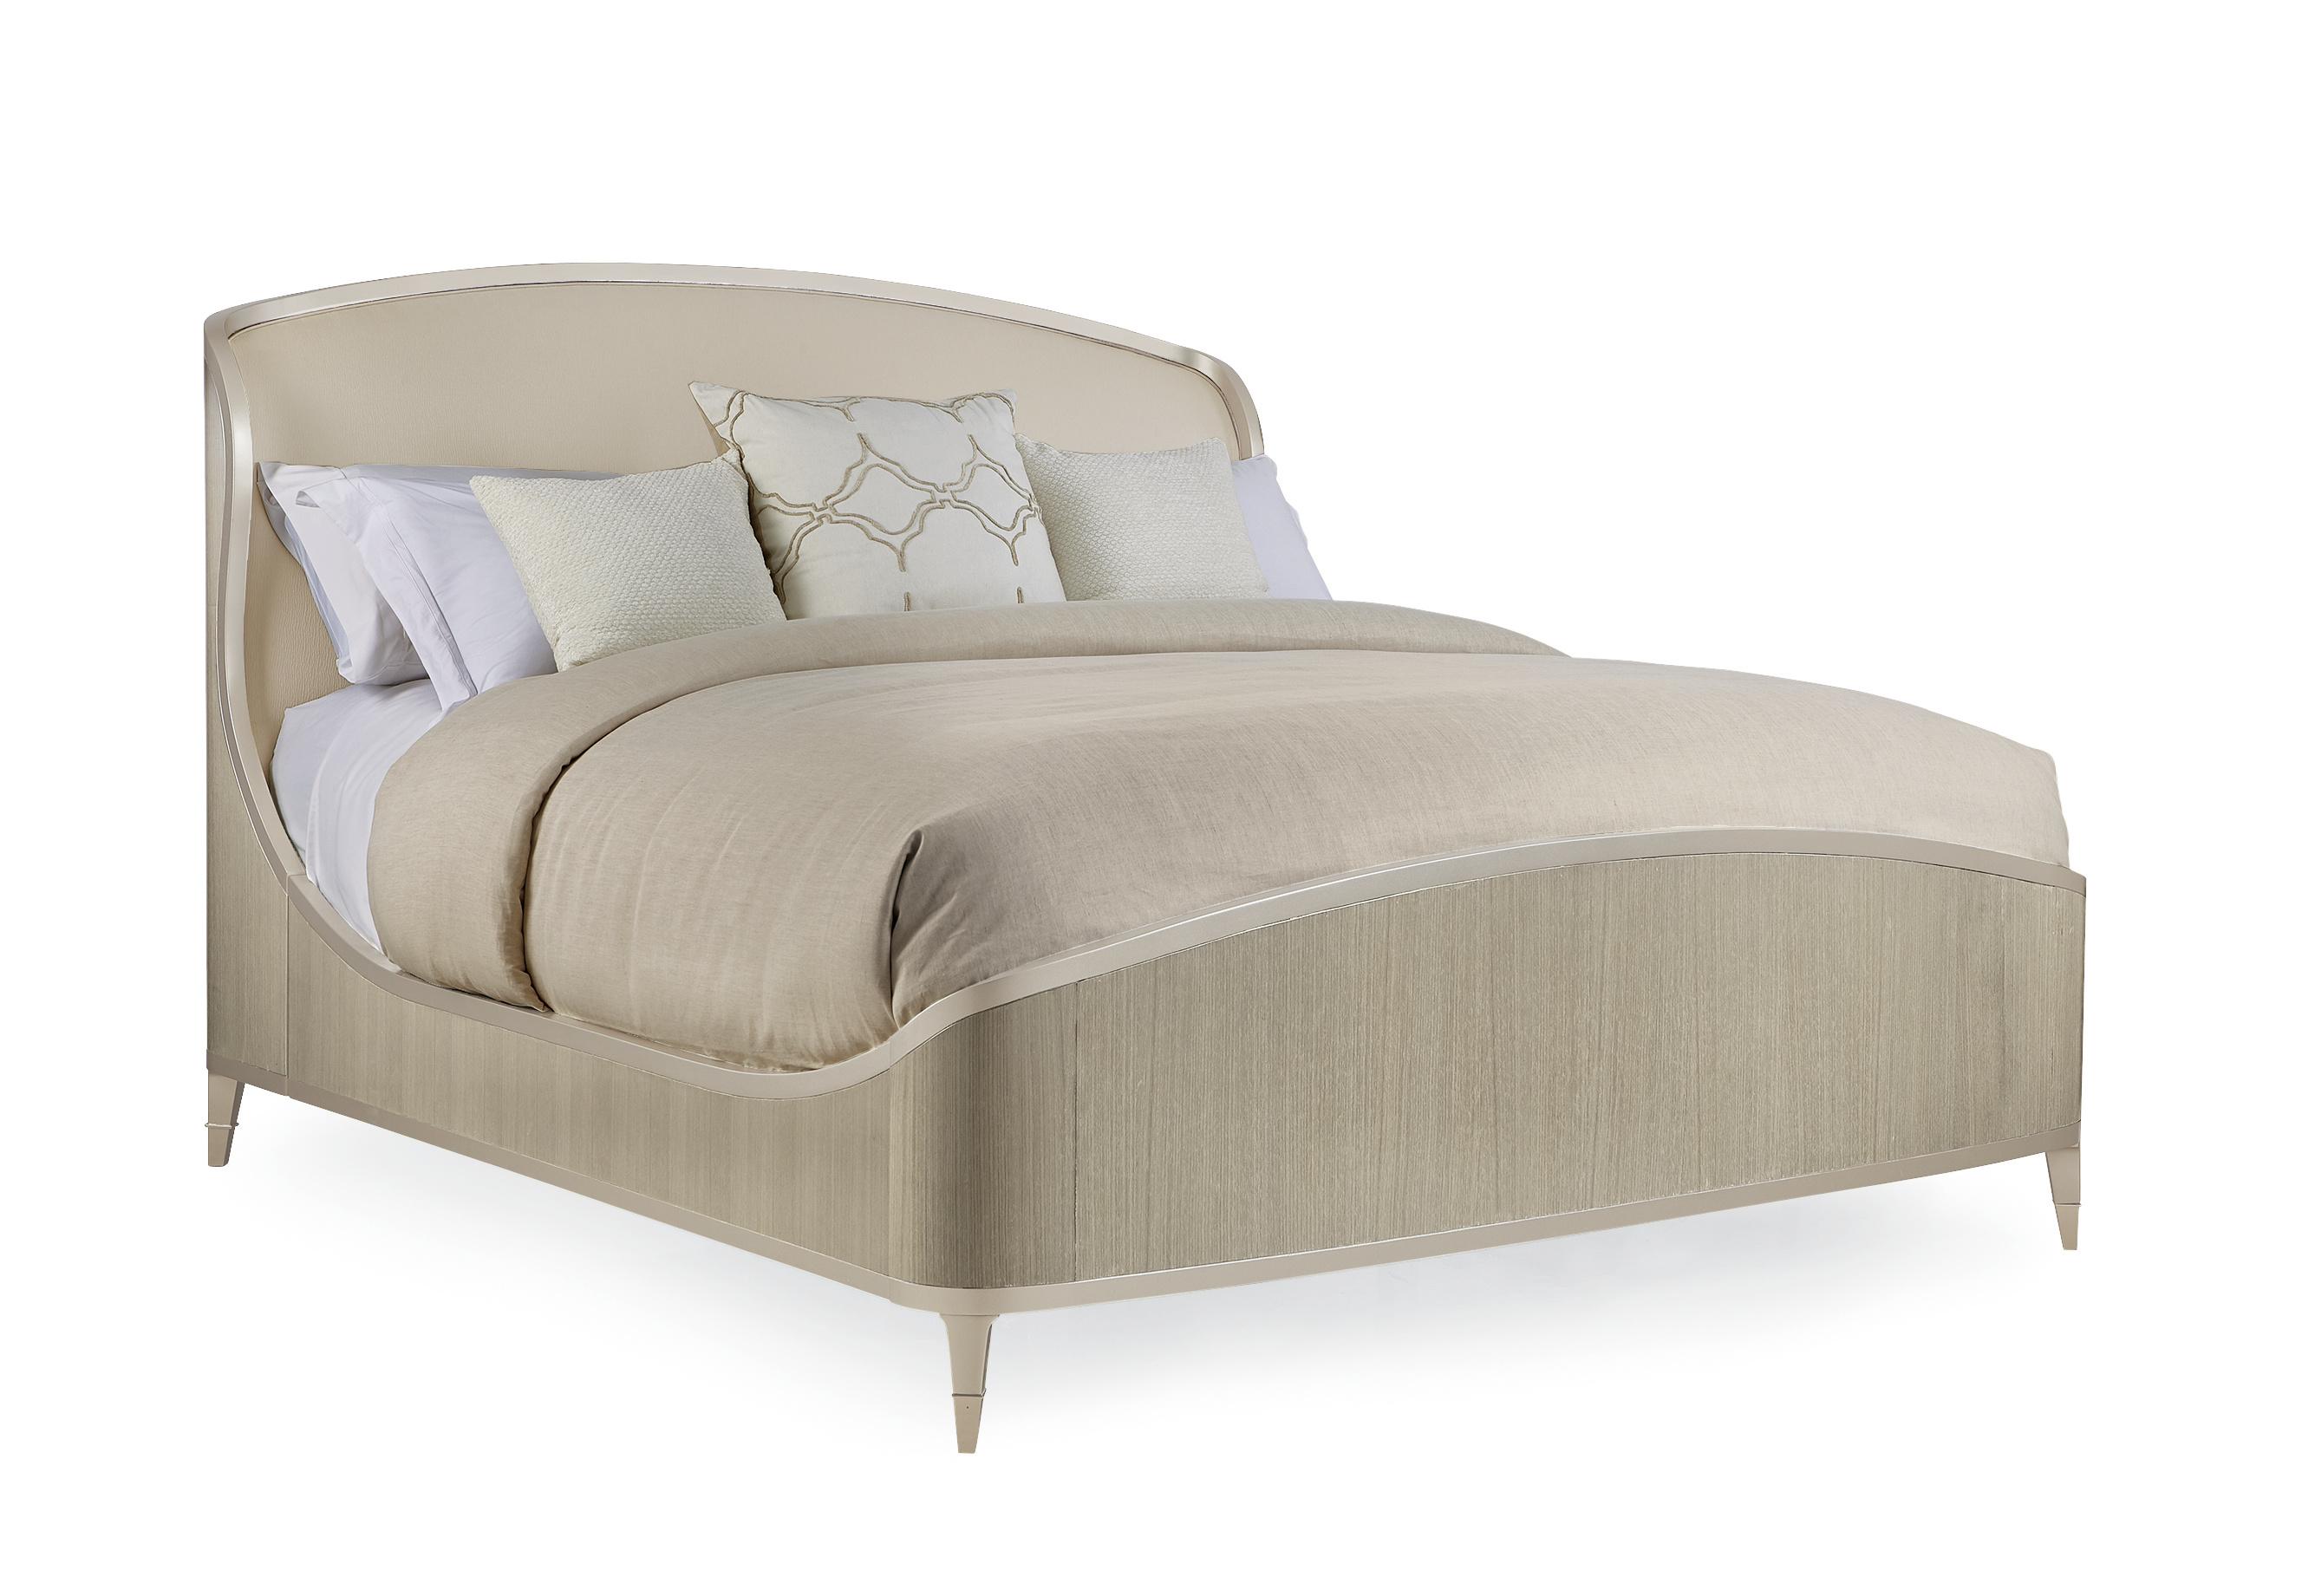 Contemporary Platform Bed Good Nights Sleep CLA-417-106 in Champagne Fabric